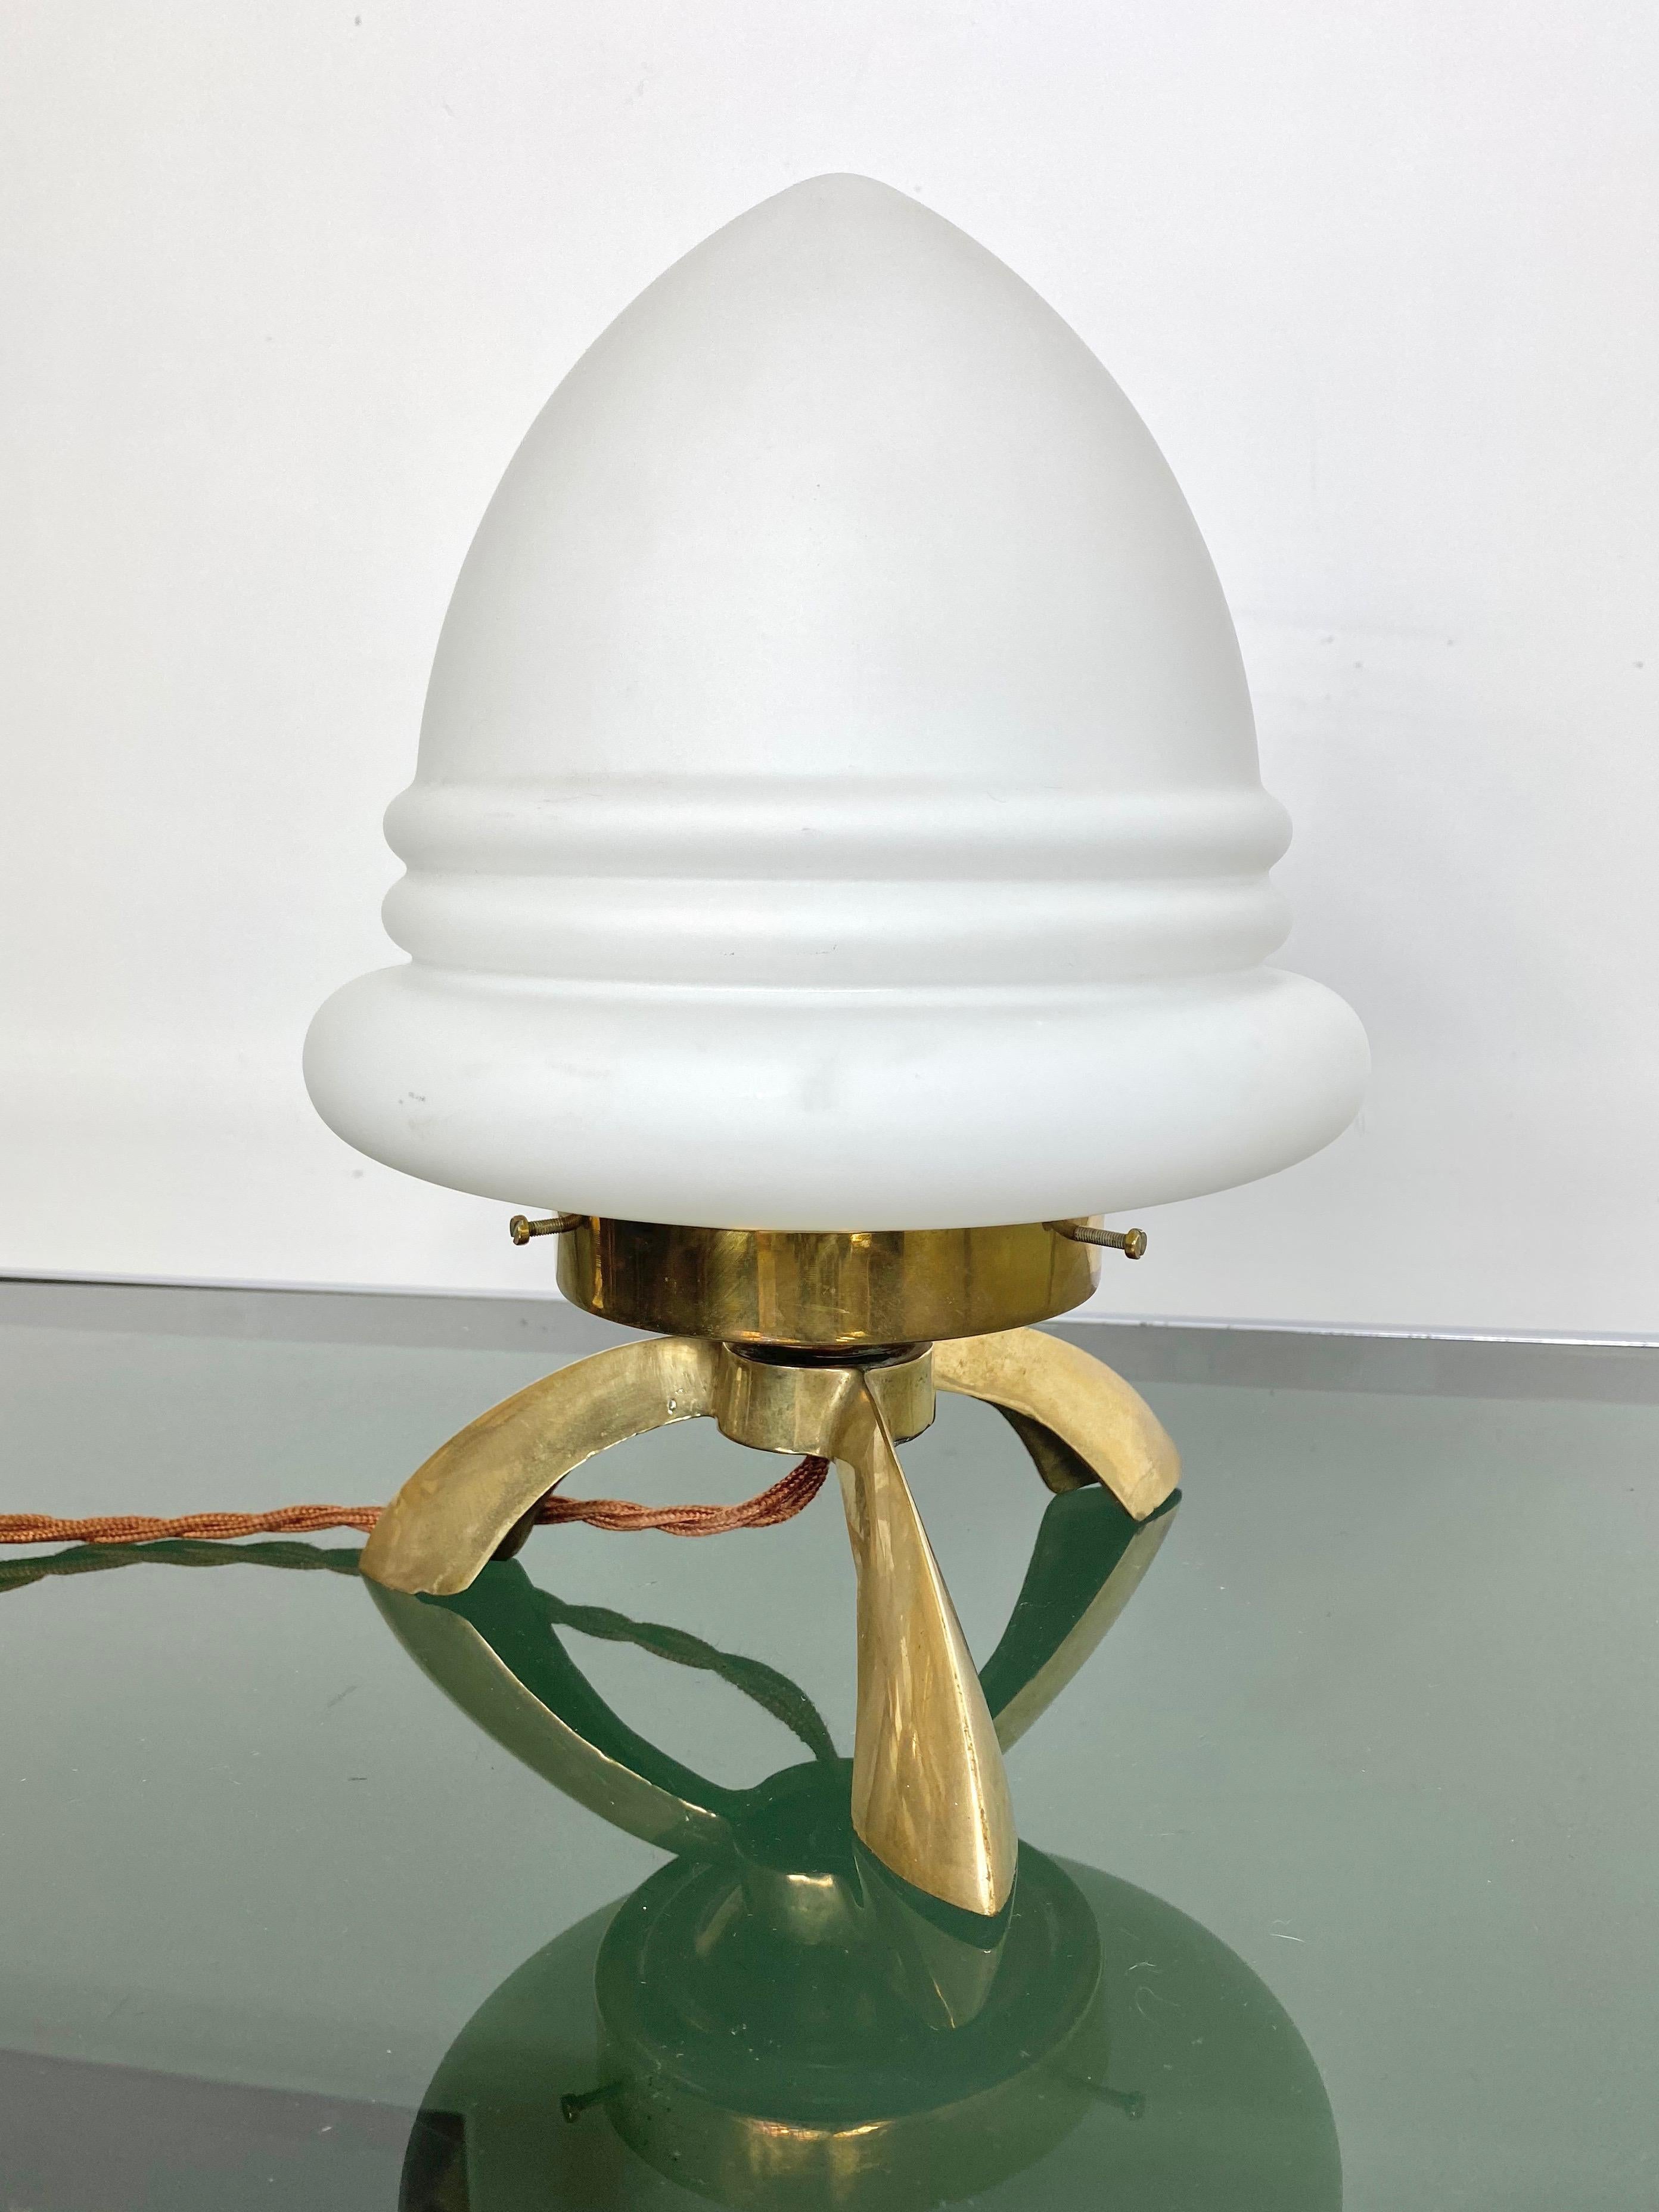 1960s table lamp in a brass tripod base executed in sculpturally blown opaline glass in the shape of an rocket shuttle. The unique style is highly suggestive of the Italian designer Angelo Lelli for Arredoluce.